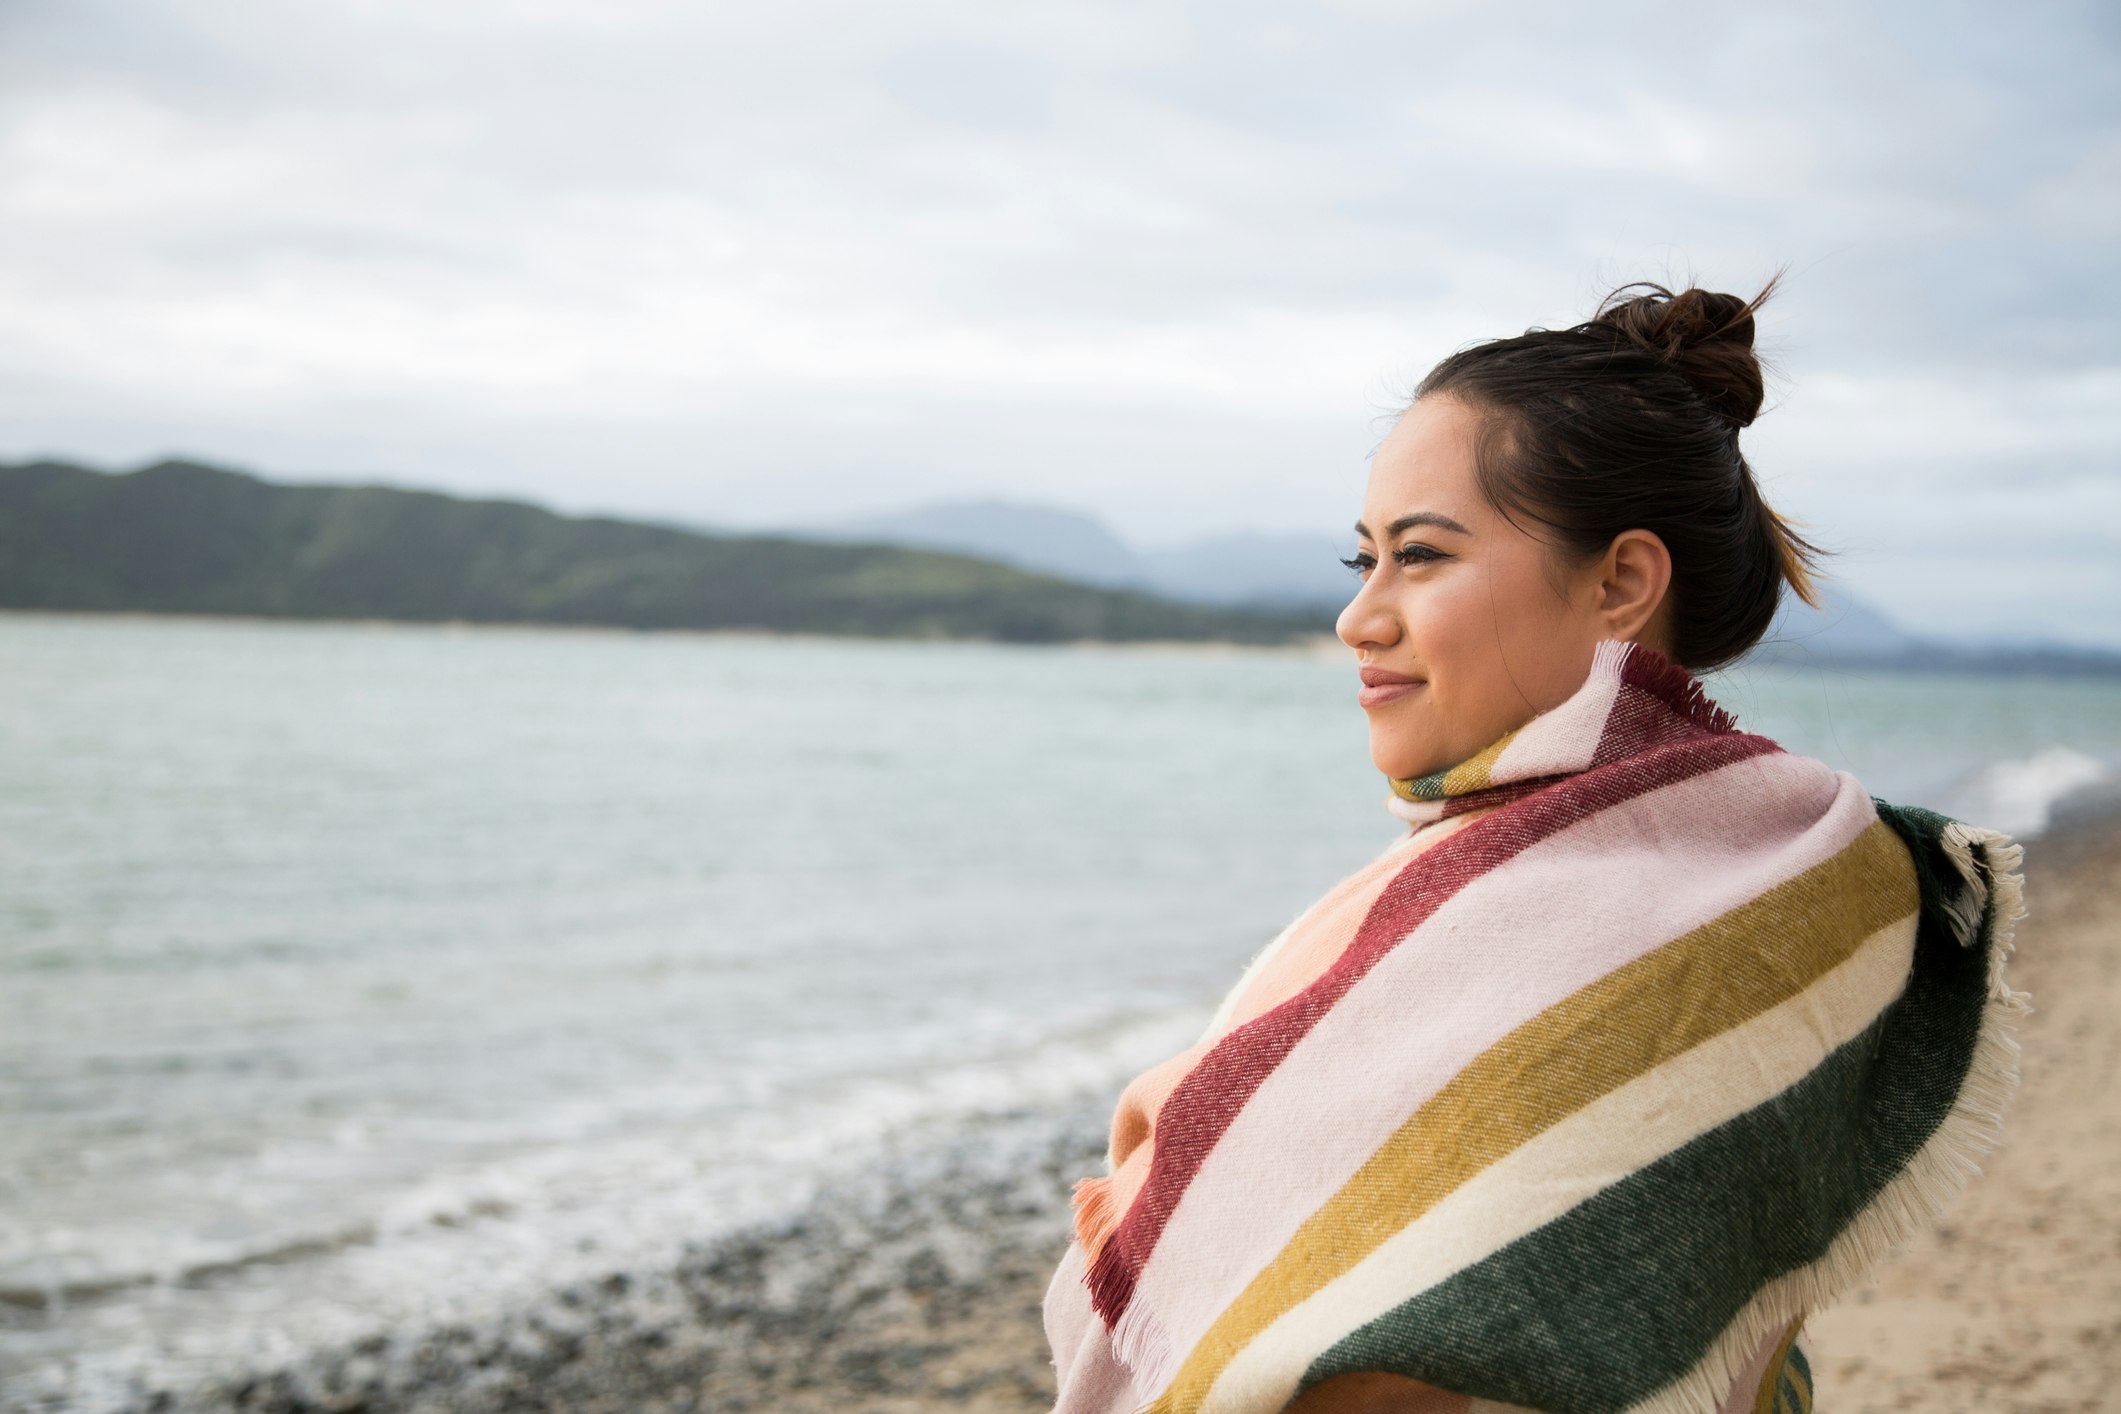 Maori woman wrapped in a shawl looks out to sea on a beautiful beach